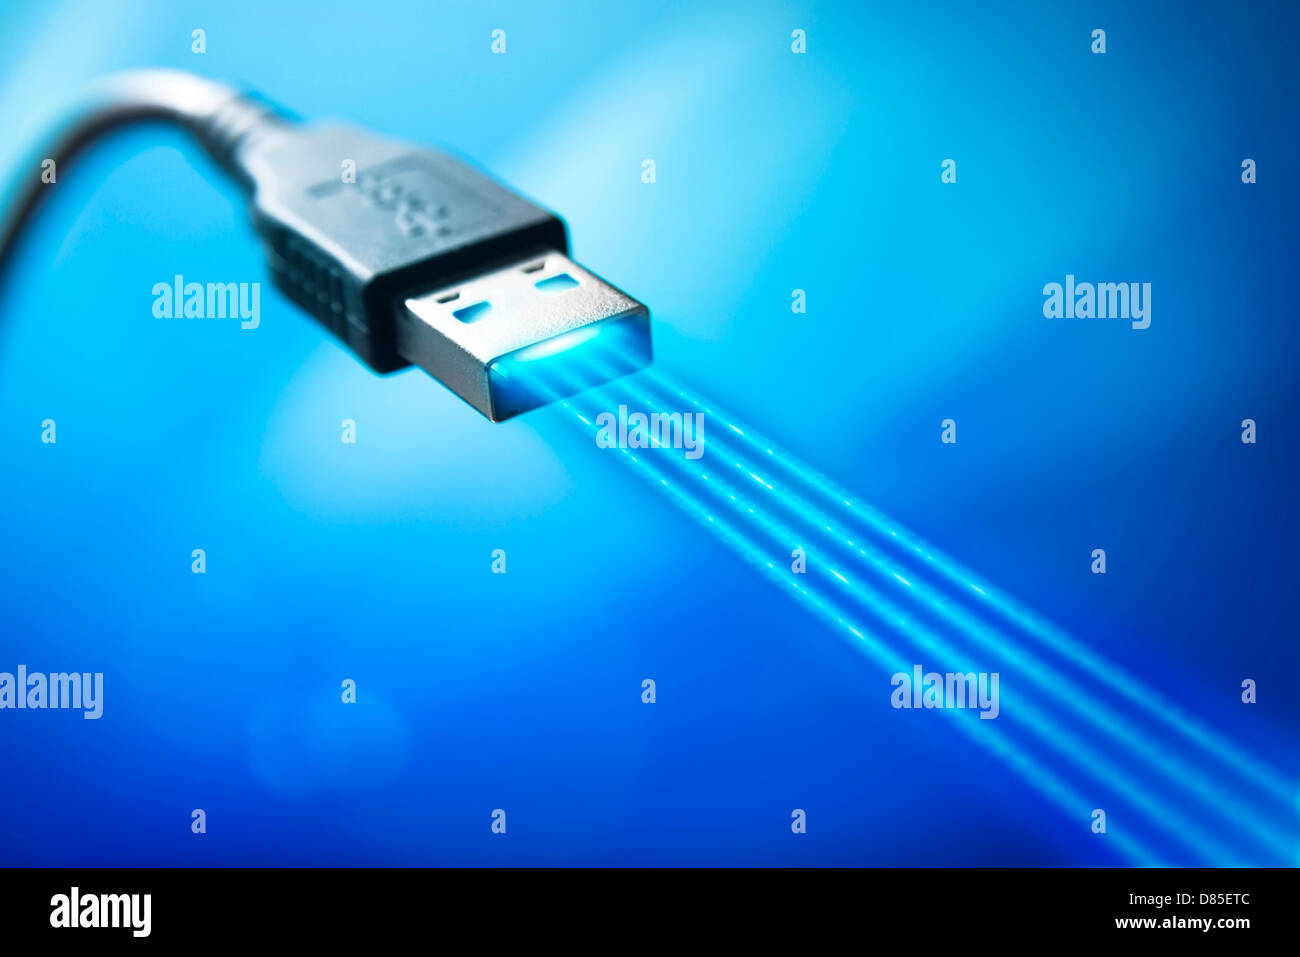 Digital transmission from a USB cable. Stock Photo